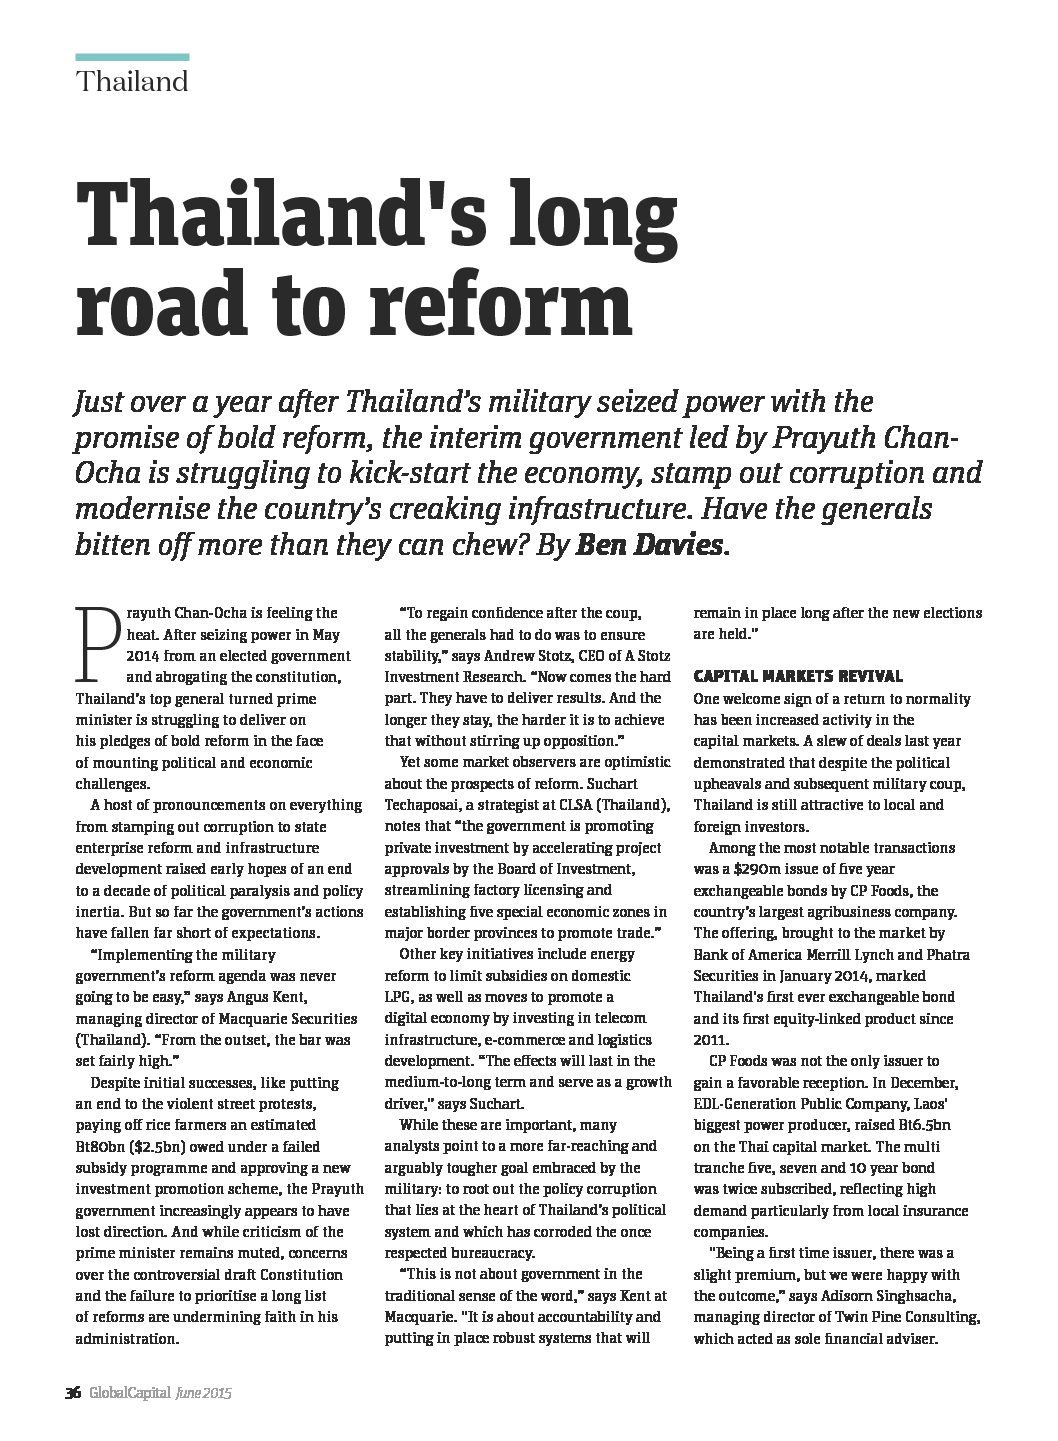 Global Capital Magazine – Thailand’s long road to reform